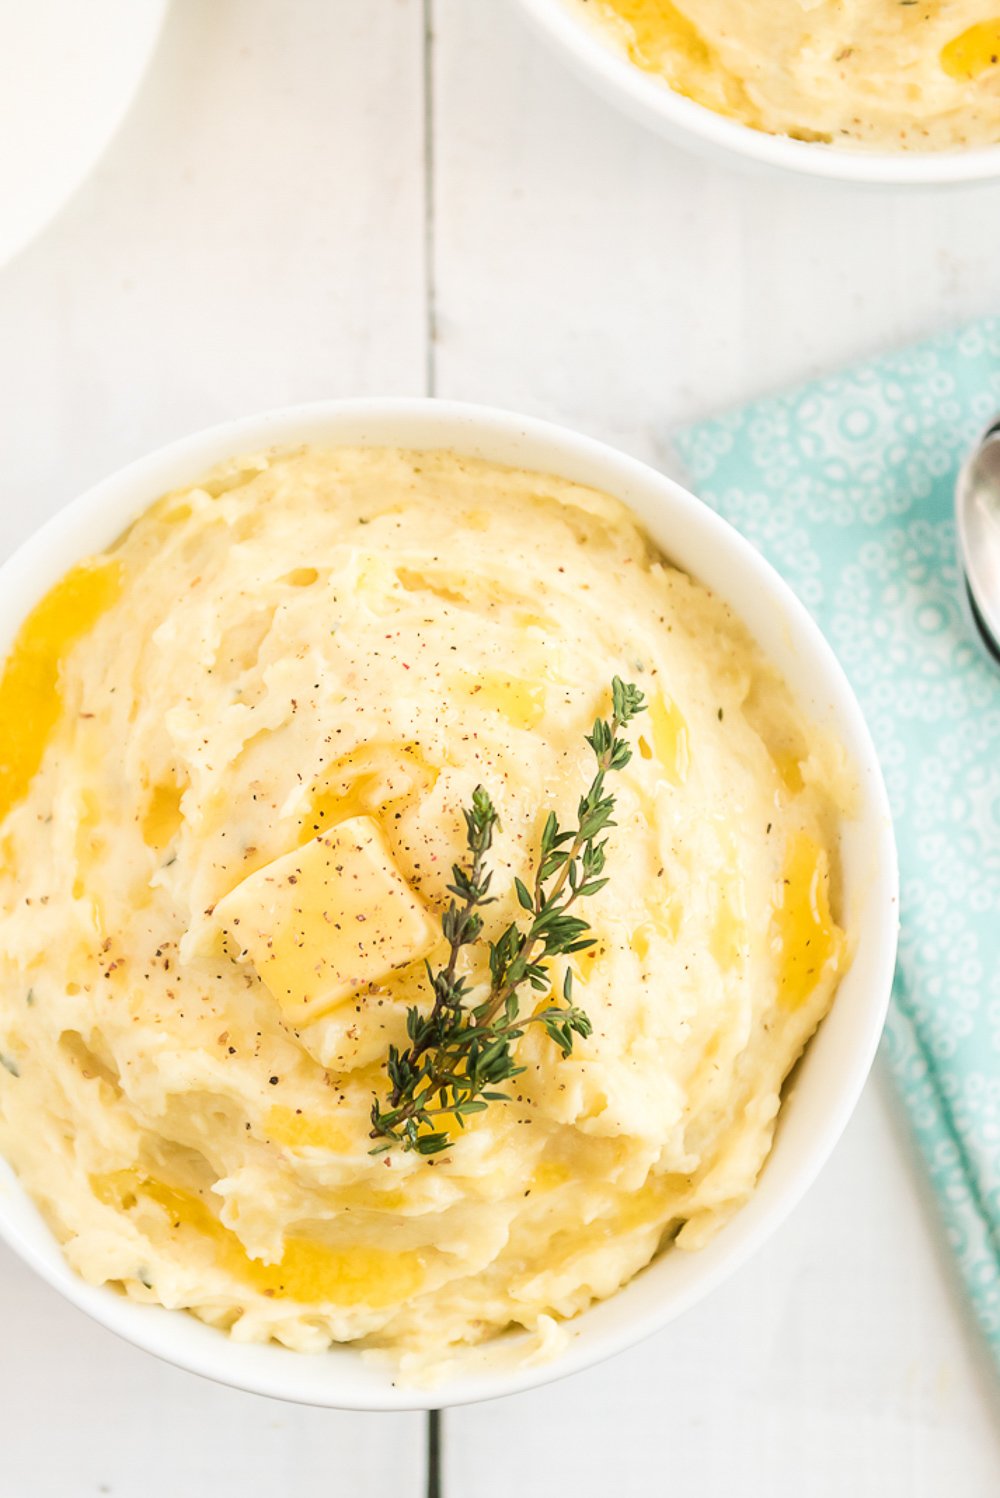 Best Mashed Potatoes Recipe with Garlic and Thyme Sugar